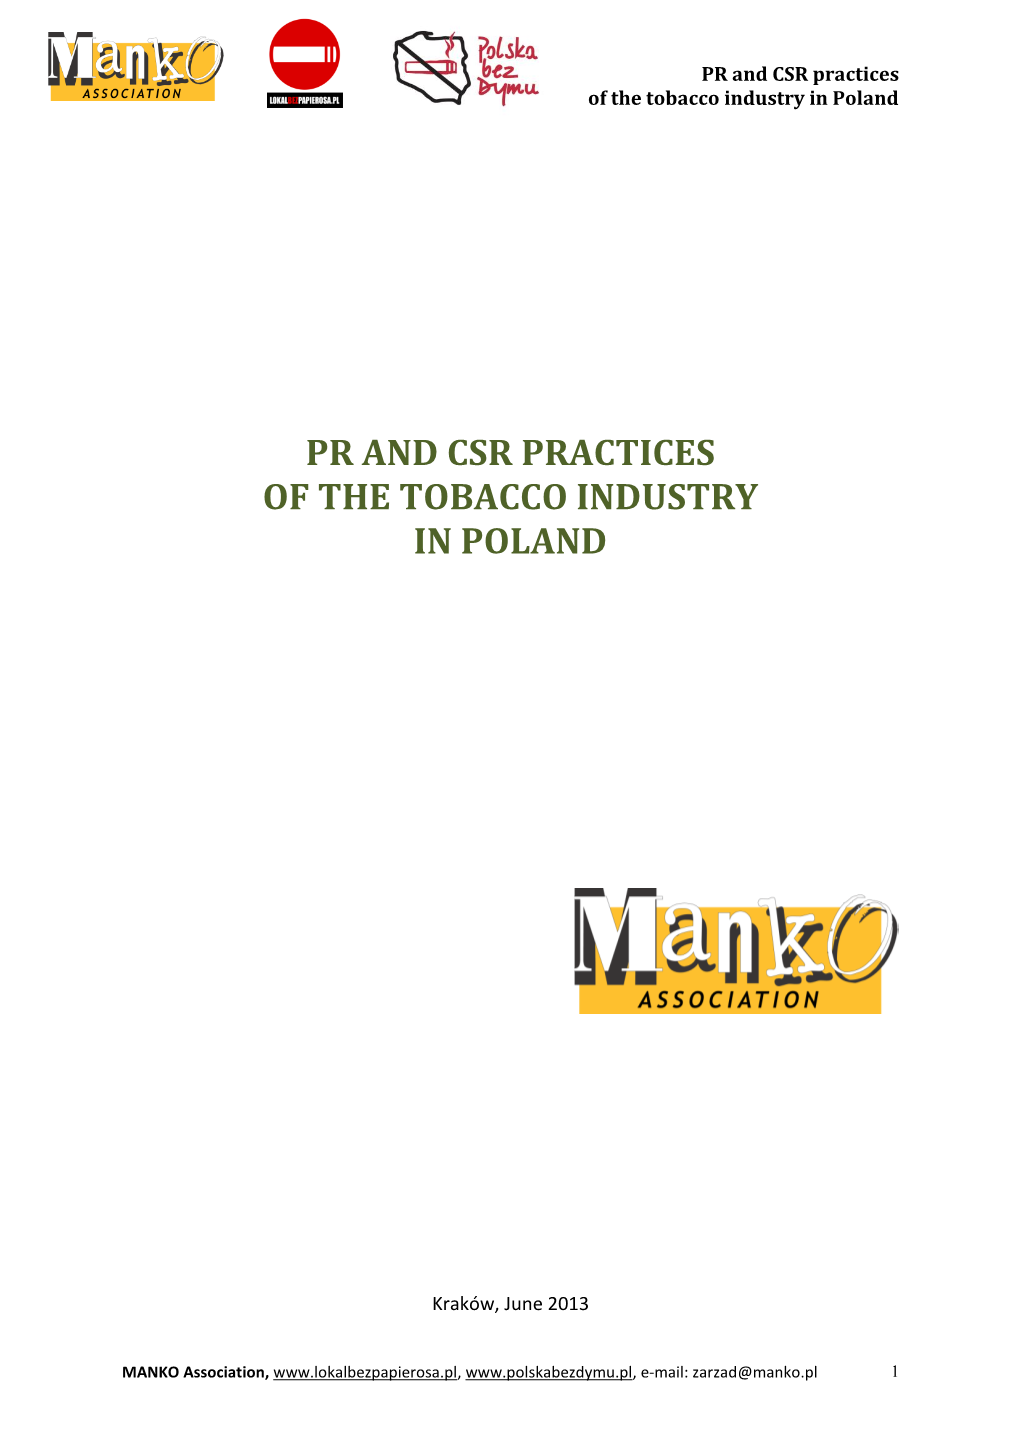 PR and CSR Practices of the Tobacco Industry in Poland